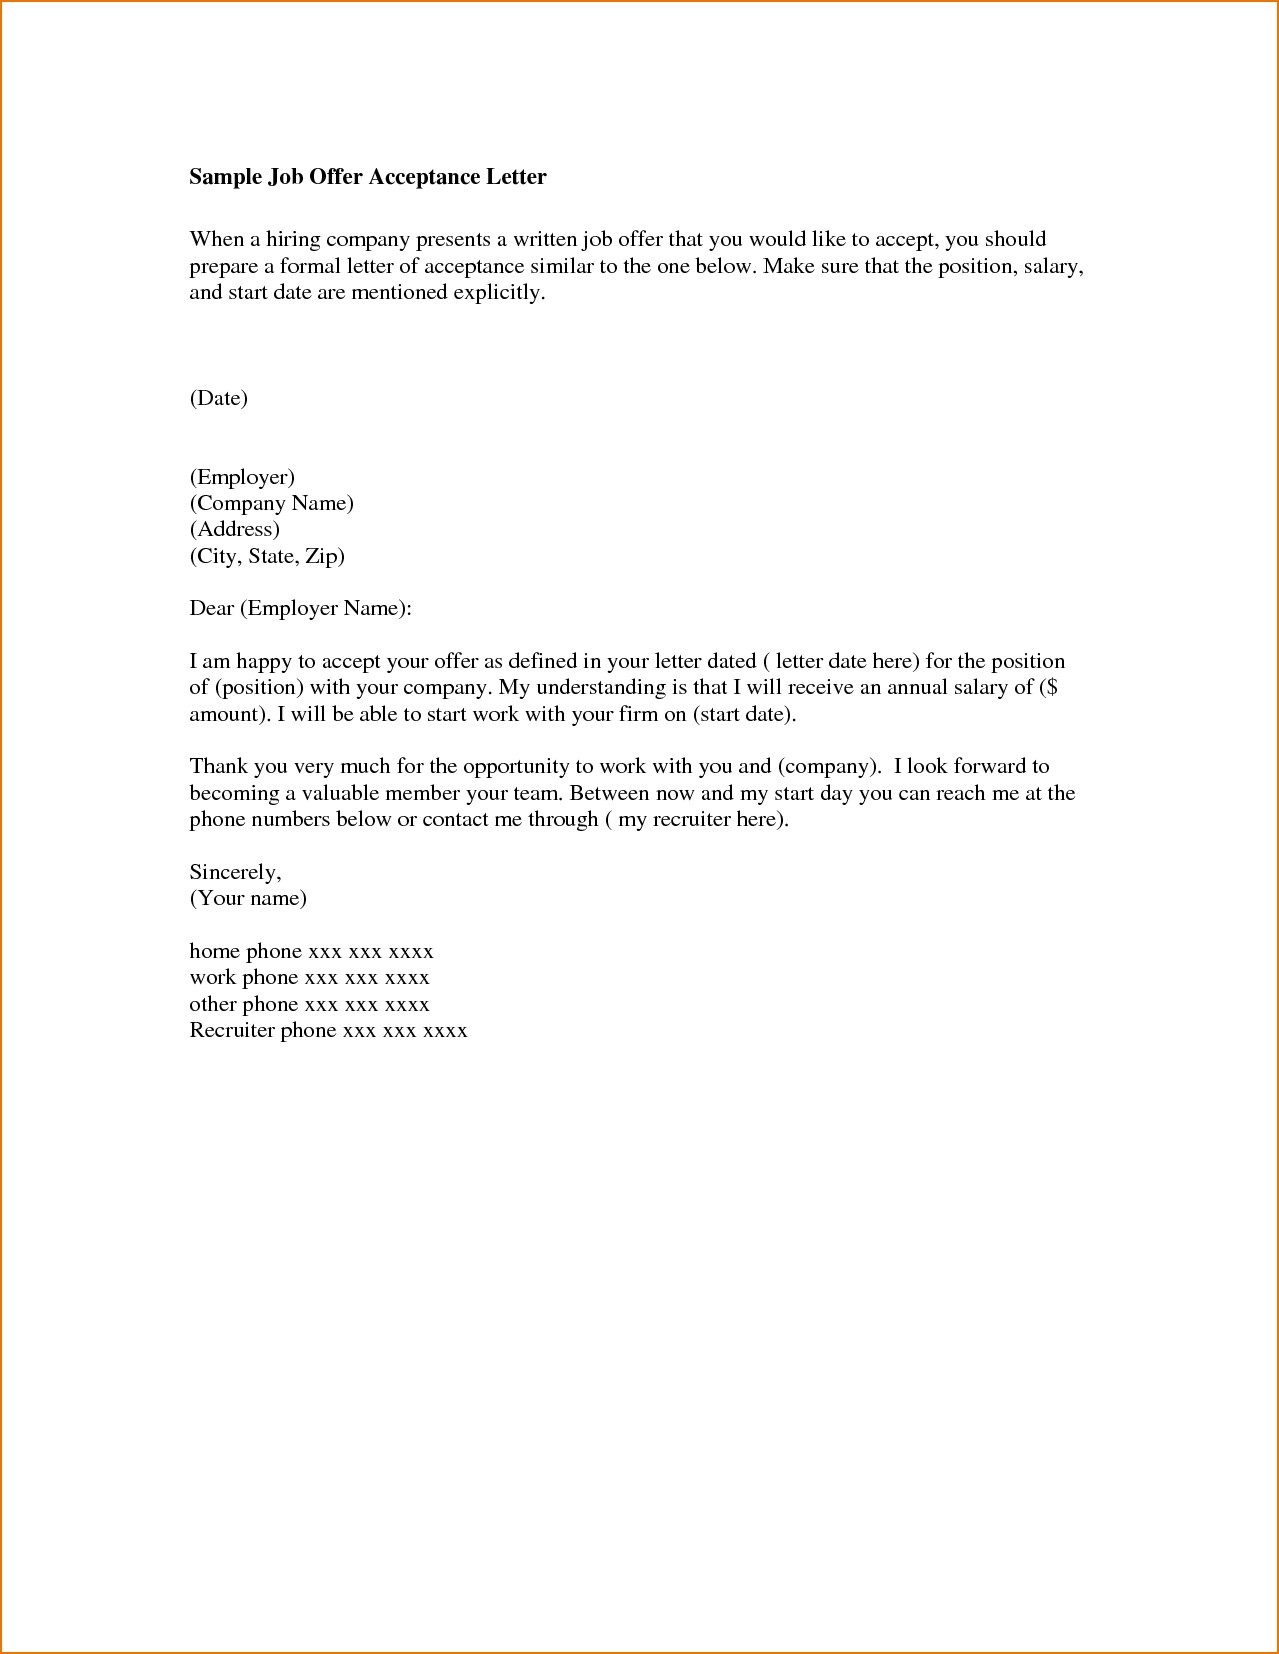 Job Offer Acceptance Letter Template - Job Fer Acceptance Letter Refrence How to Write A Thank You Letter